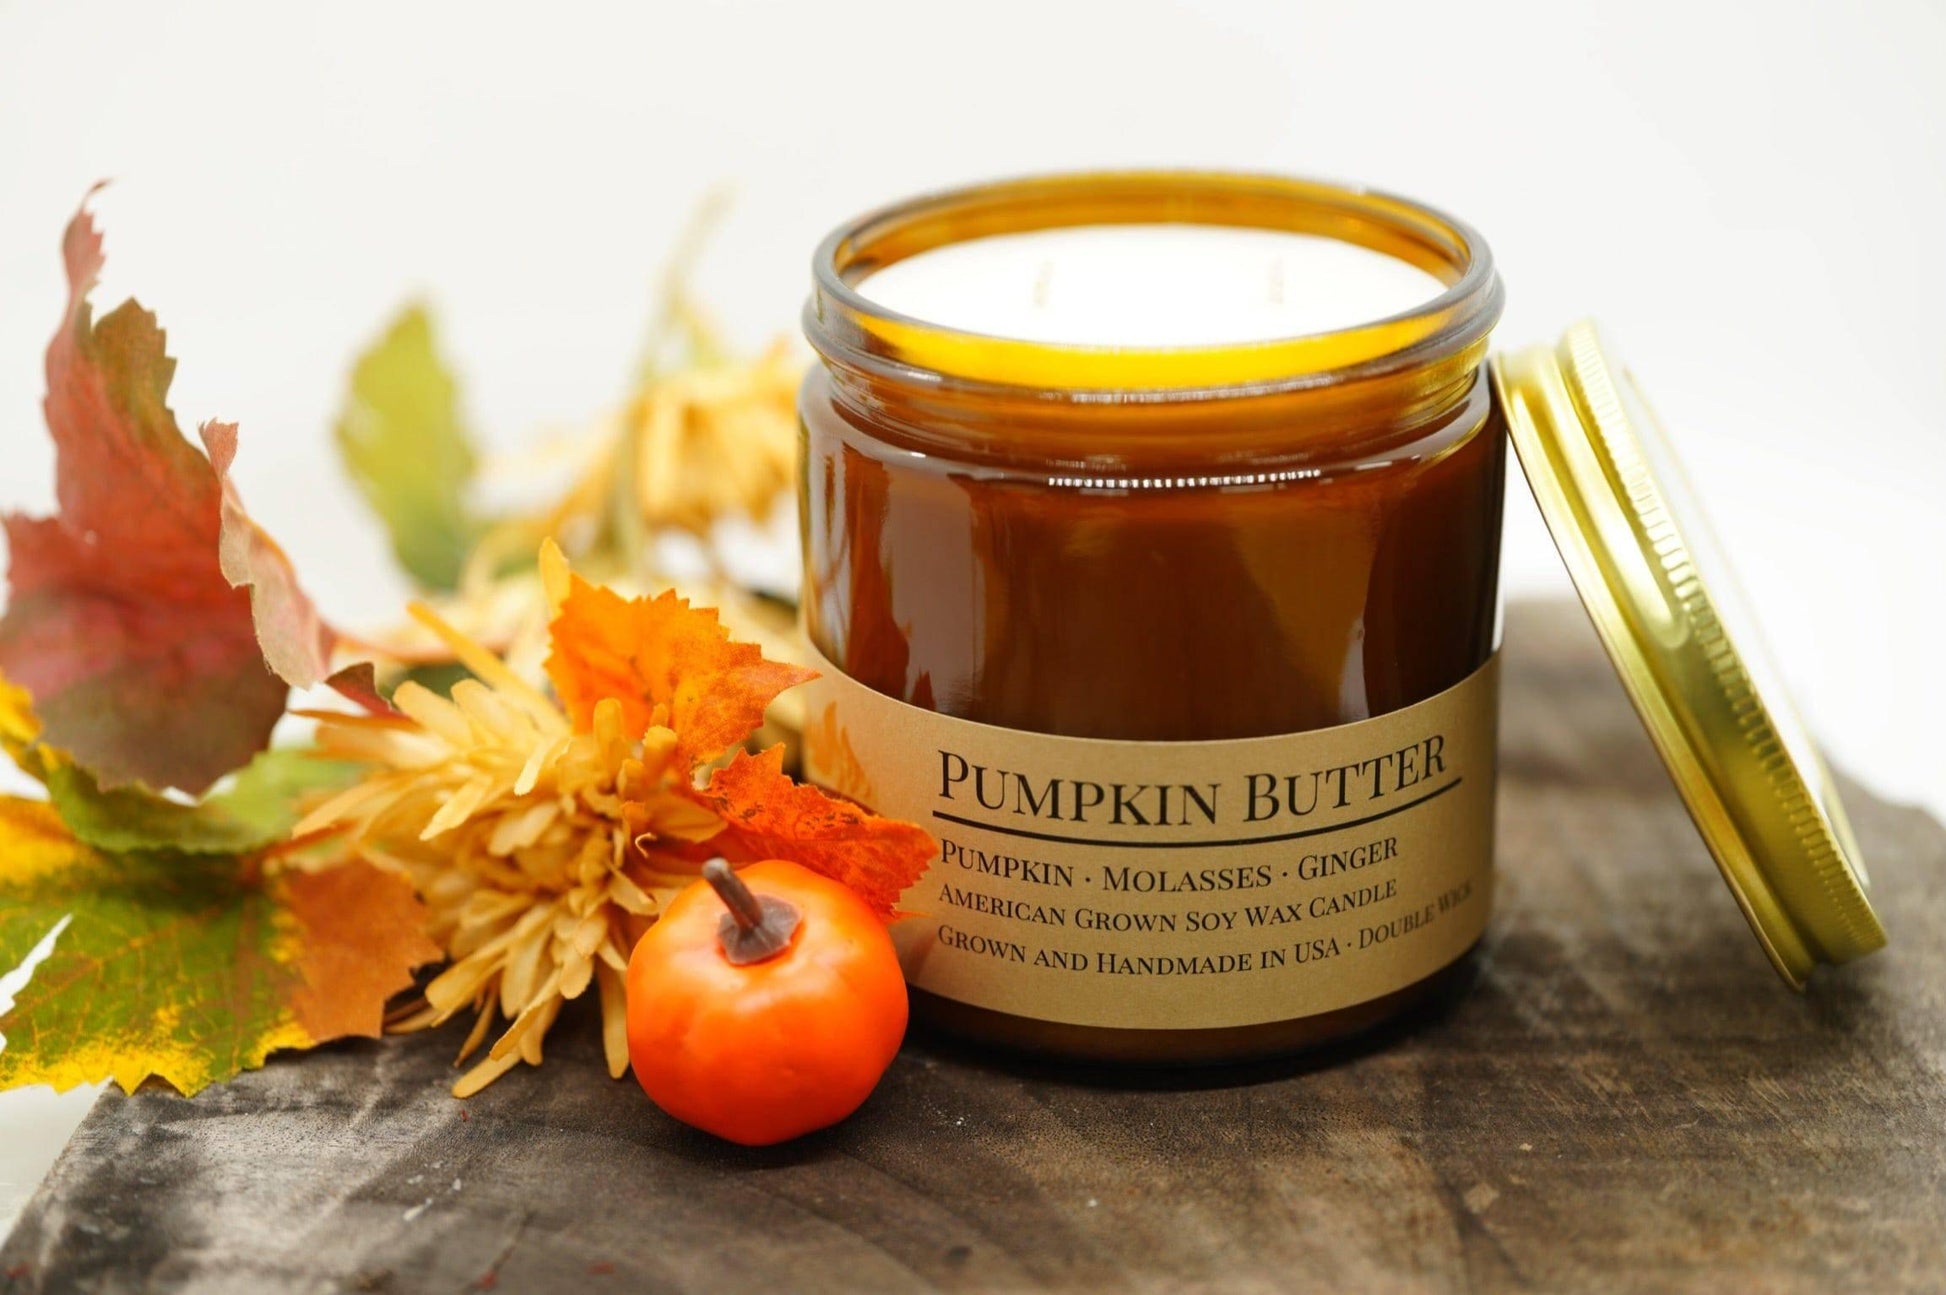 Pumpkin Butter Soy Wax Candle | 16 oz Double Wick Amber Apothecary Jar - Prairie Fire Candles